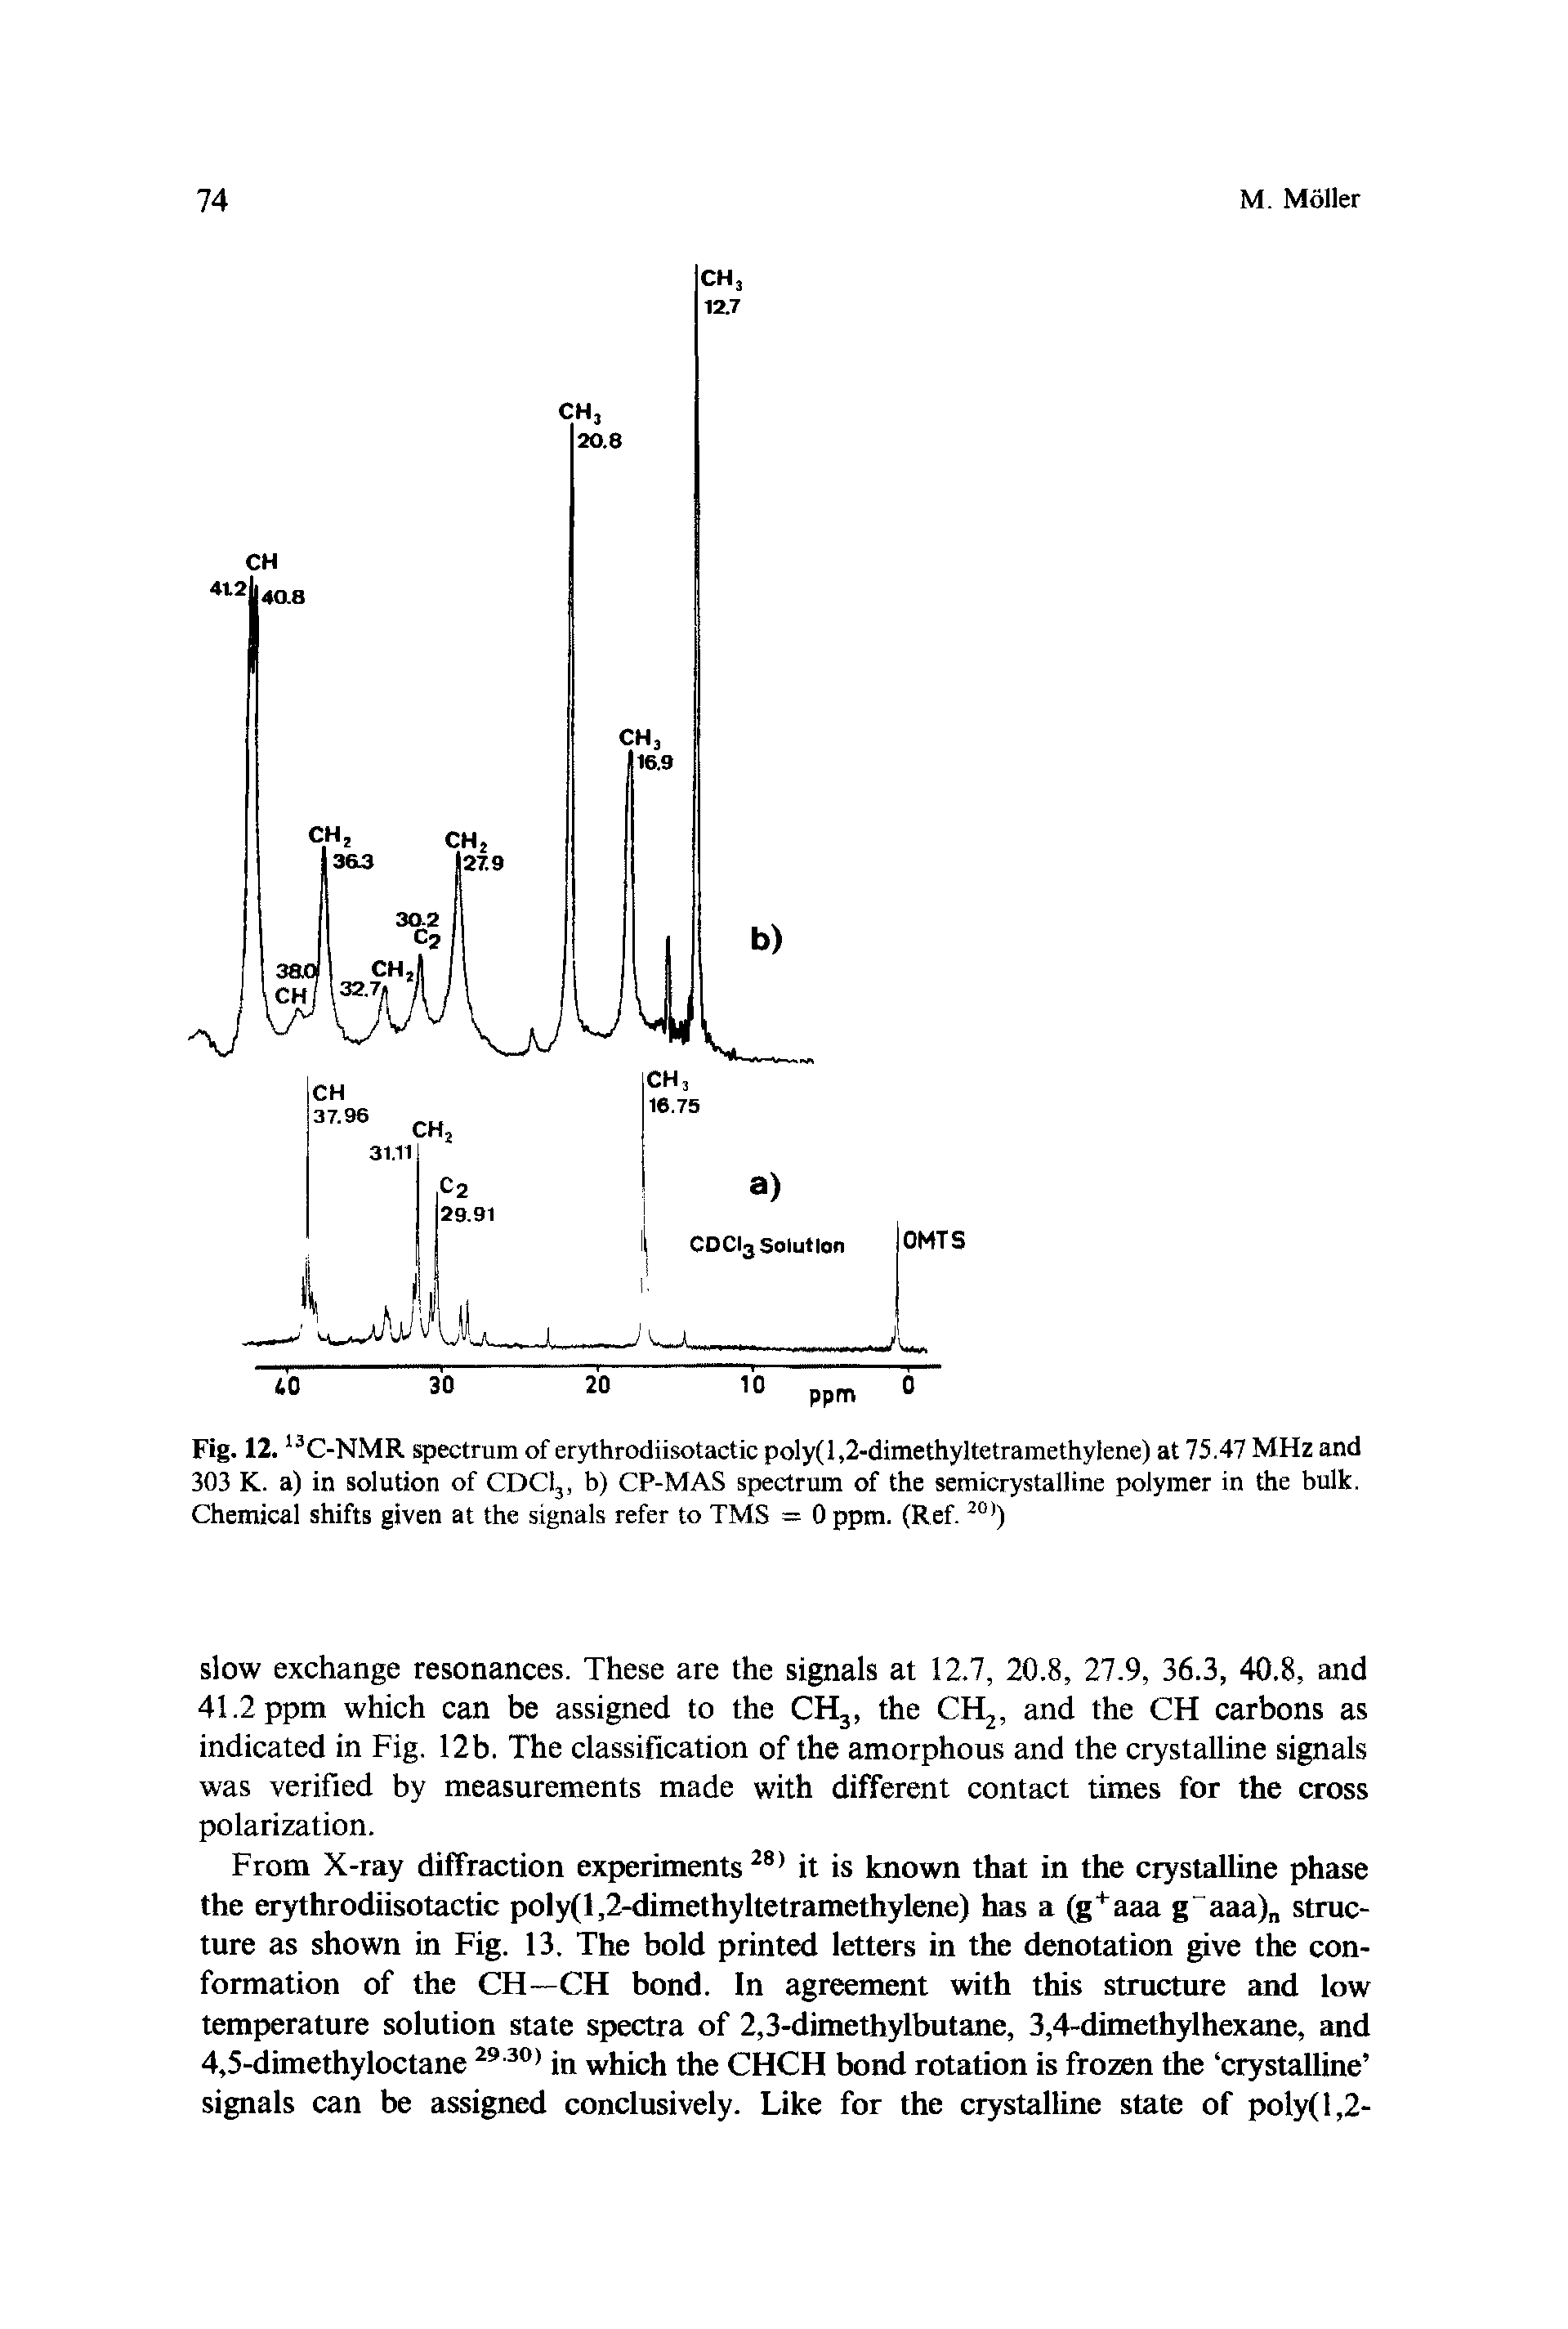 Fig. 12.13C-NMR spectrum of erythrodiisotactic poly(l,2-dimethyltetramethylene) at 75.47 MHz and 303 K. a) in solution of CDC13, b) CP-MAS spectrum of the semicrystalline polymer in the bulk. Chemical shifts given at the signals refer to TMS = 0 ppm. (Ref.20))...